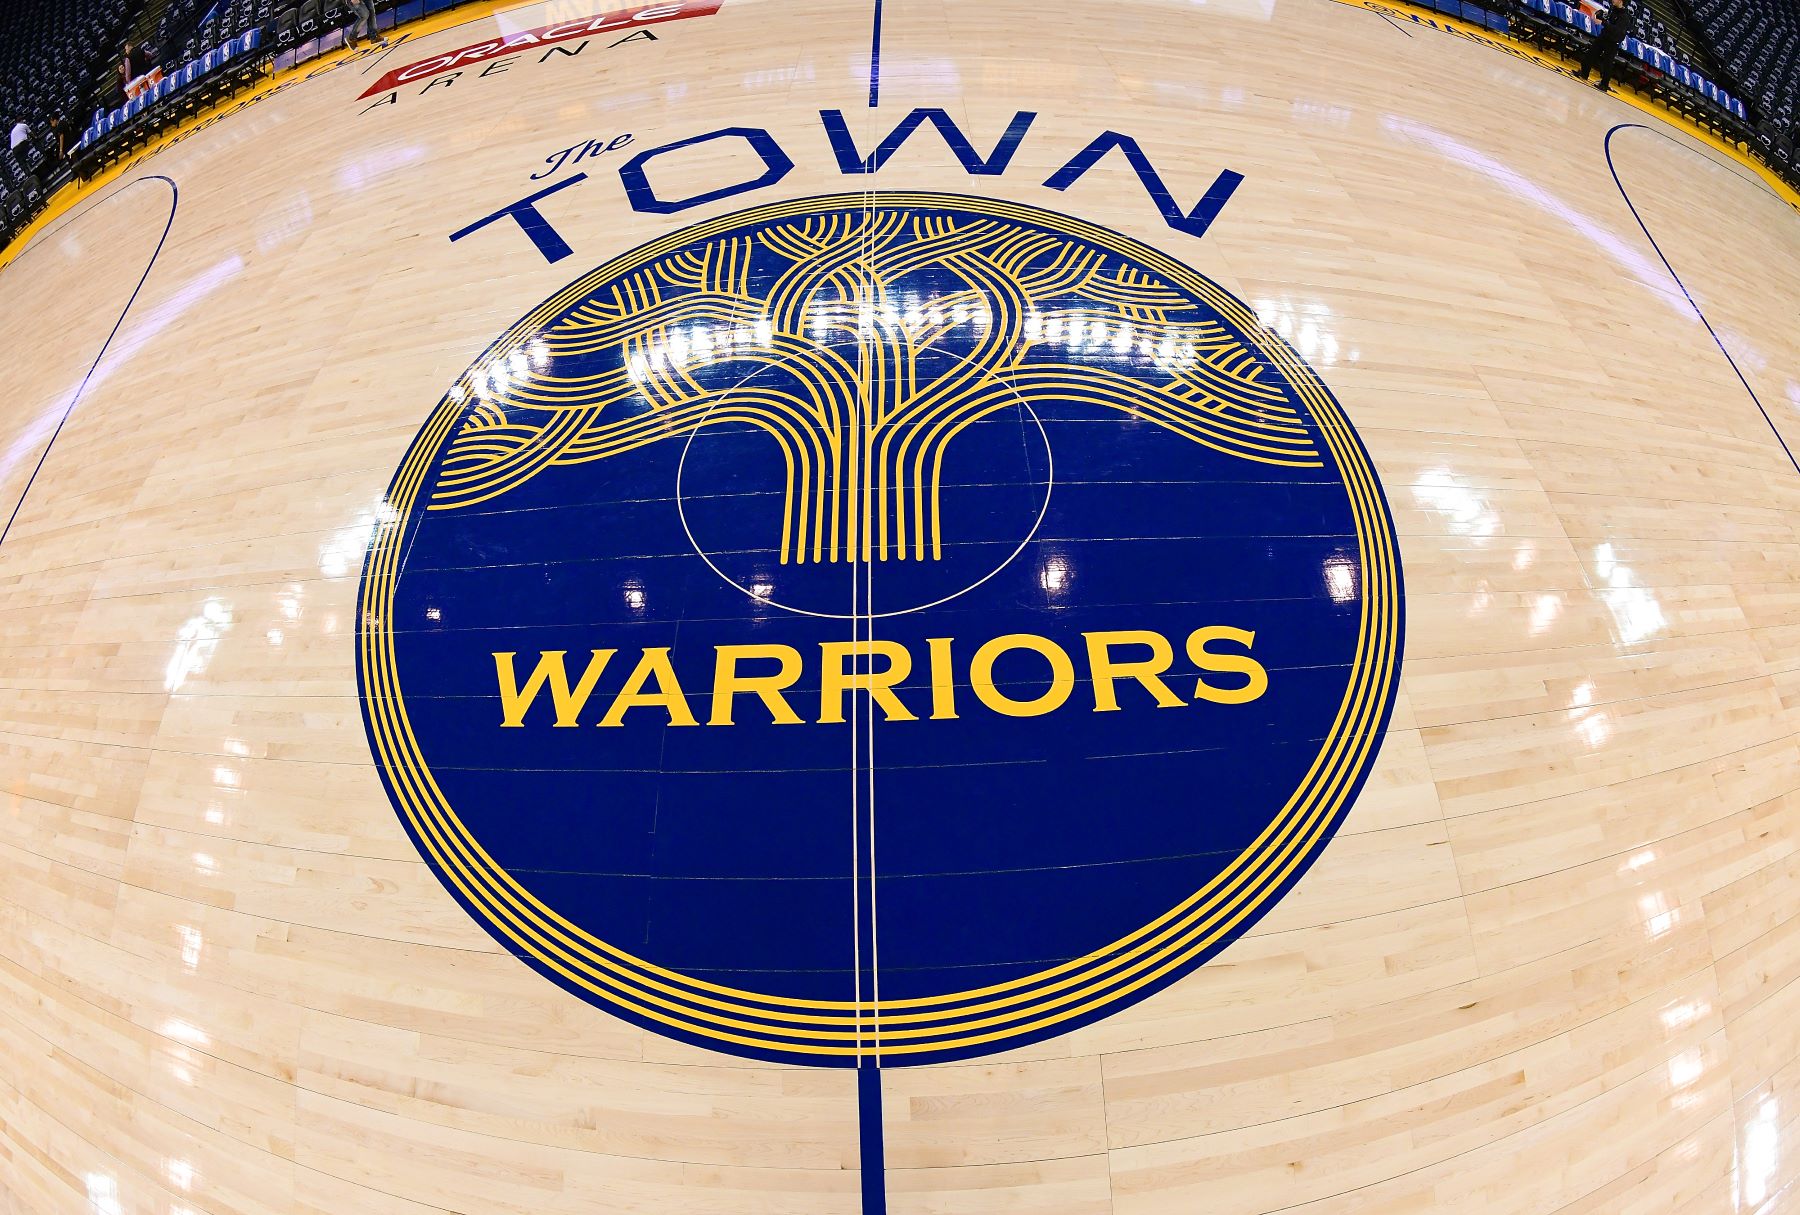 'The Town' Golden State Warriors NBA team logo on the court before a game against the Boston Celtics